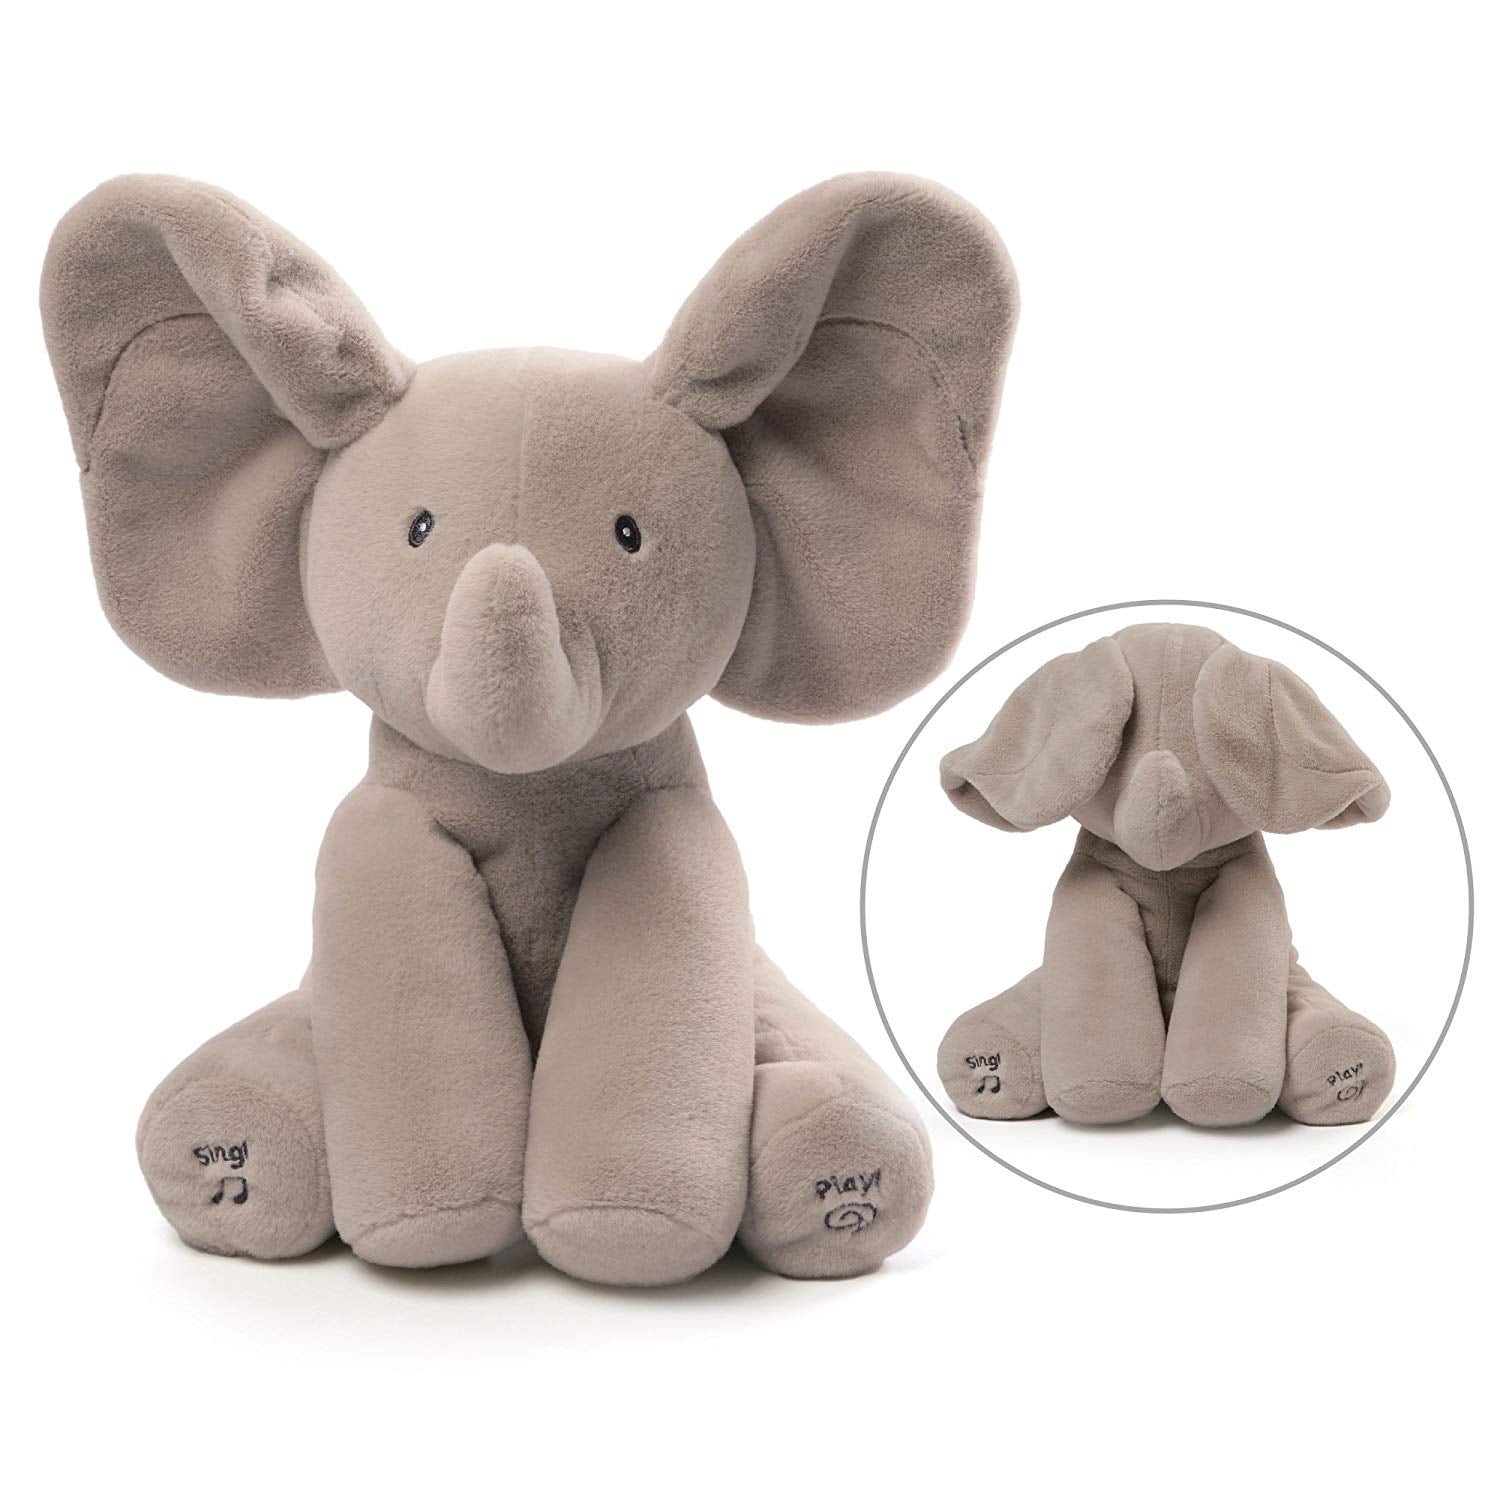 toy stuffed animals that have a playable online counterpart